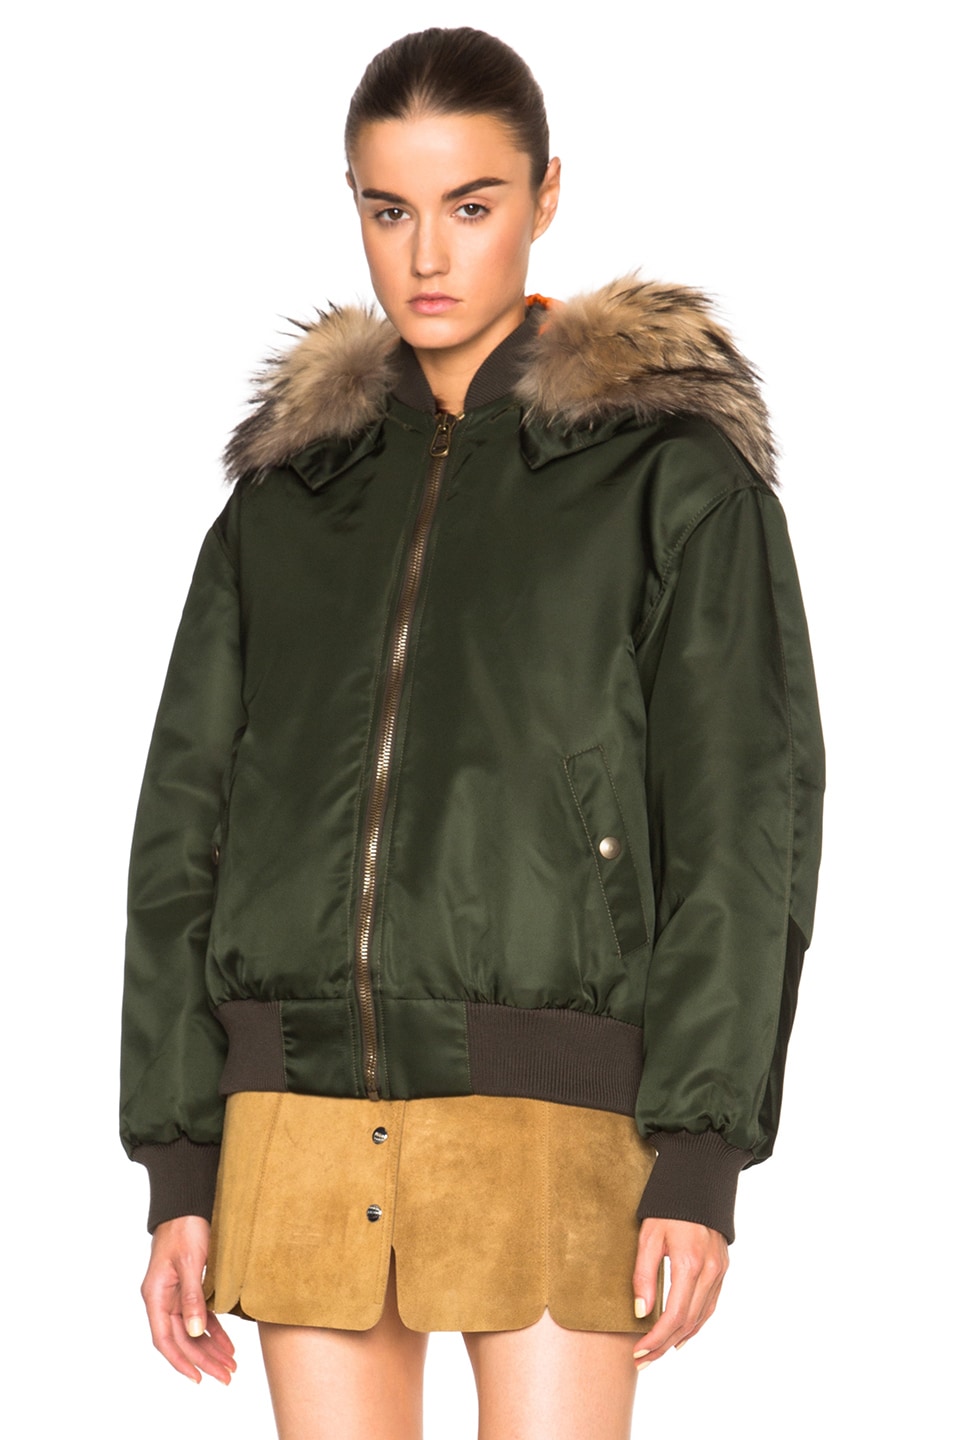 MR & MRS ITALY Bomber Jacket With Fox & Raccoon Fur in London Green ...